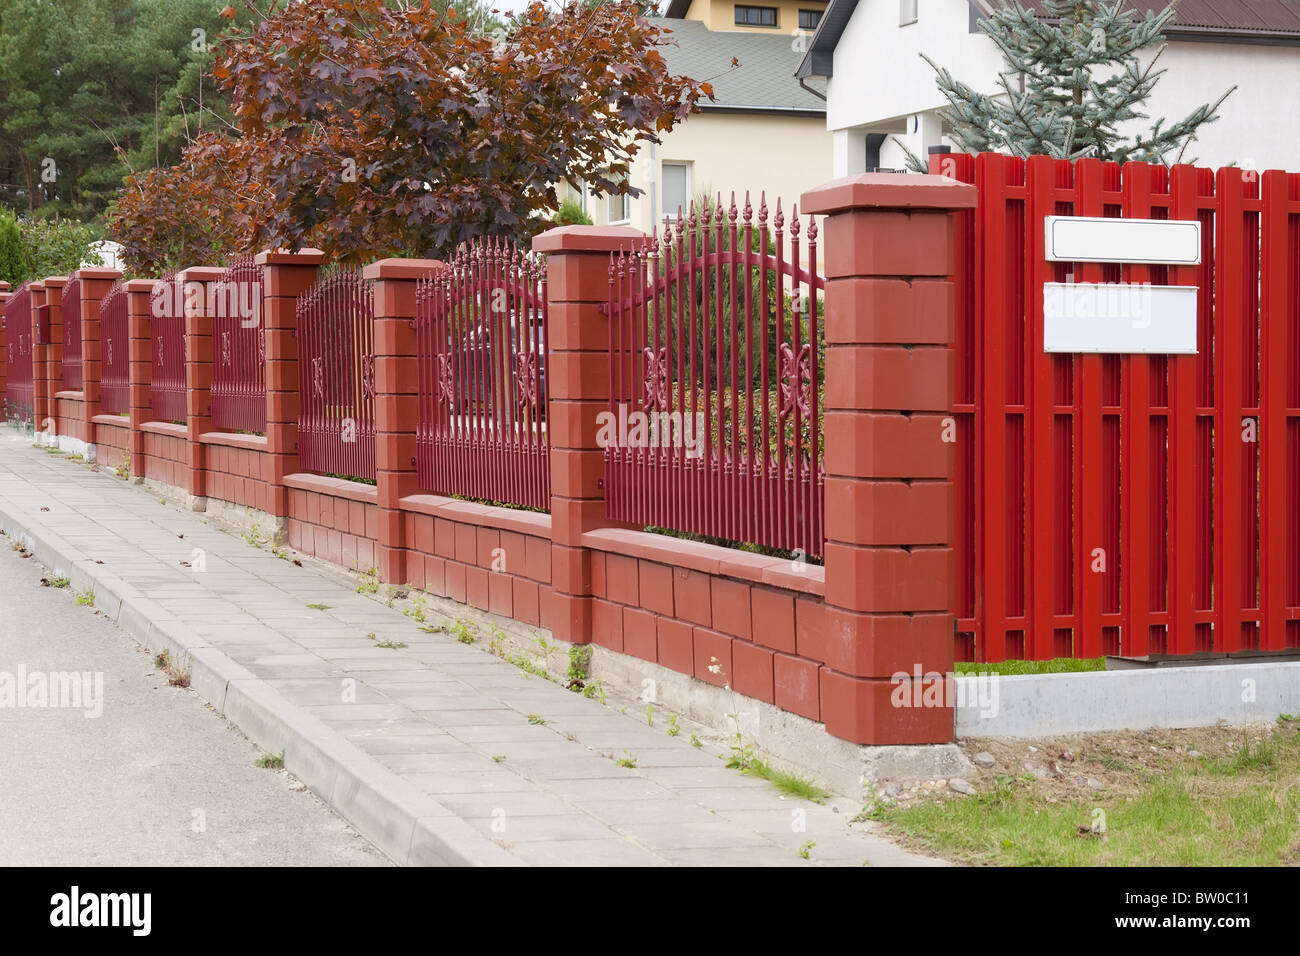 The red fence is located in rural street Stock Photo